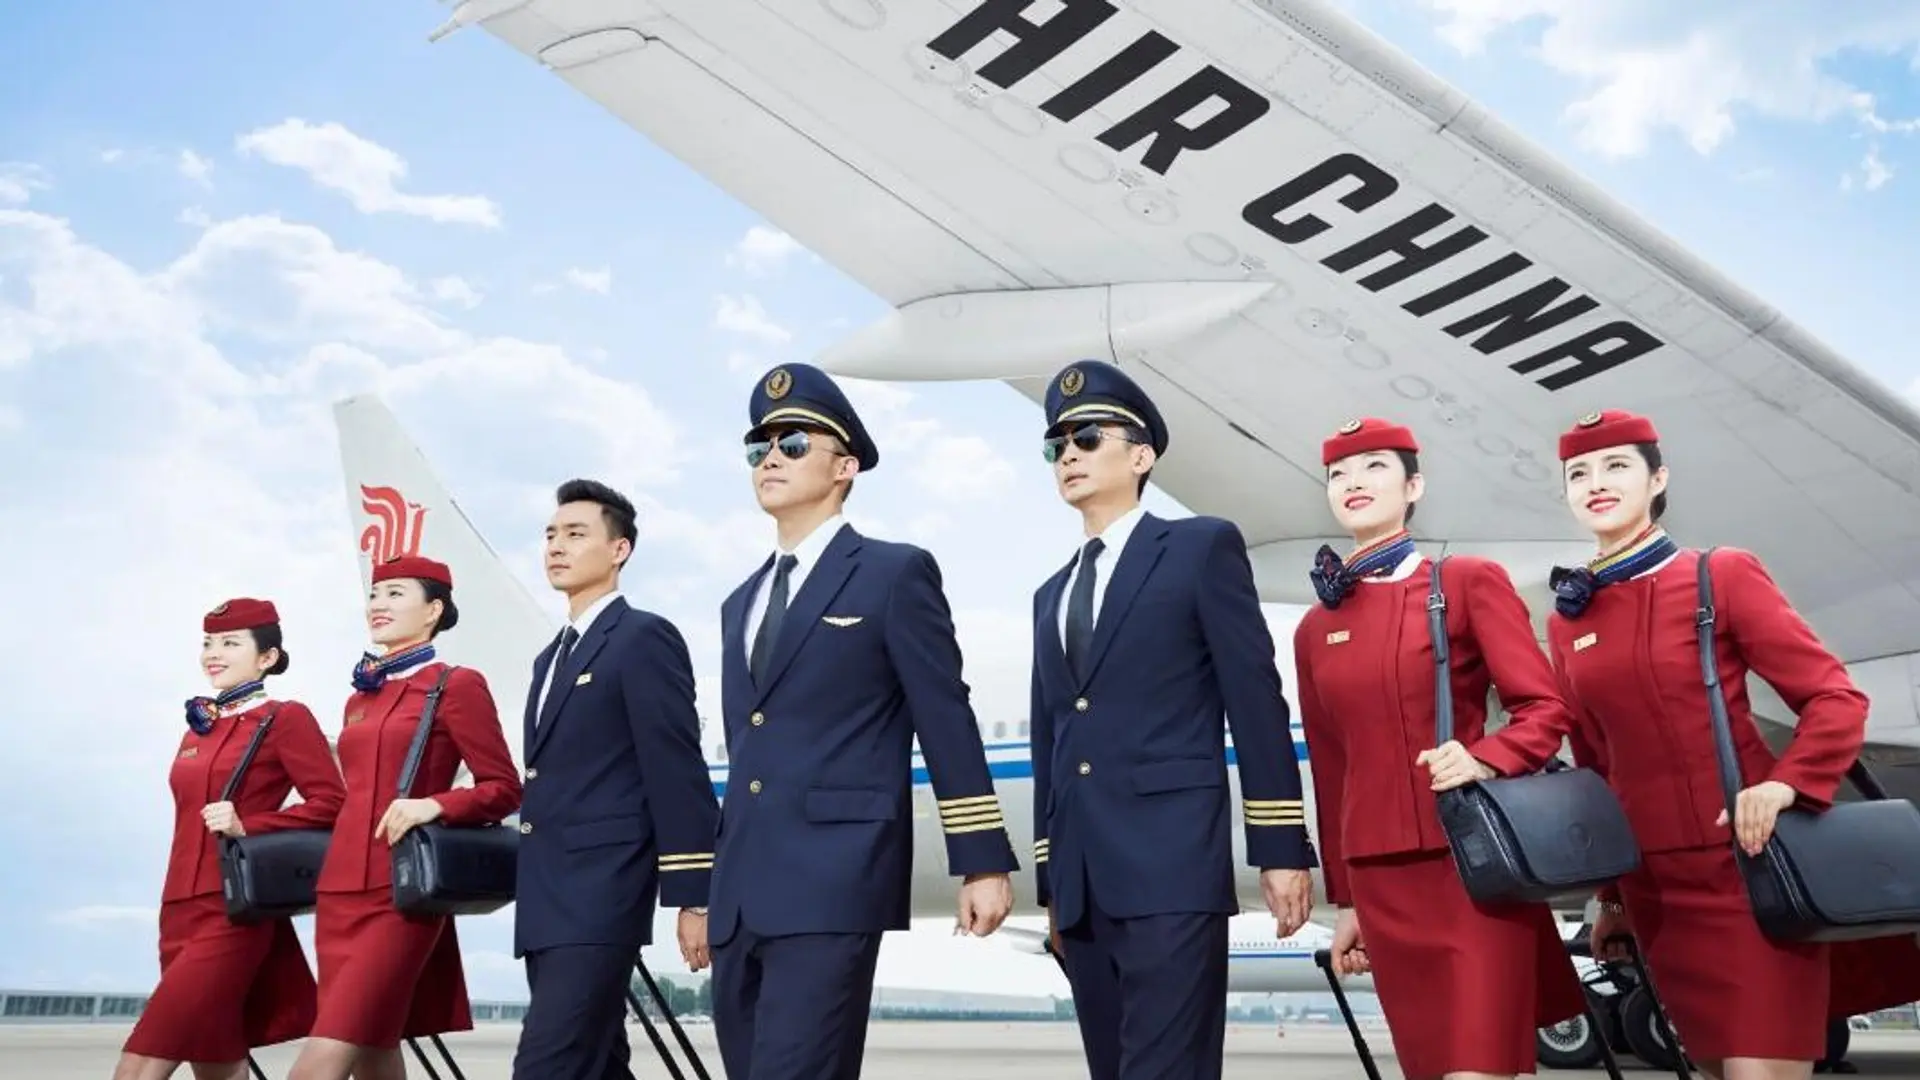 Airlines Articles - Air China launches new Business Class suite